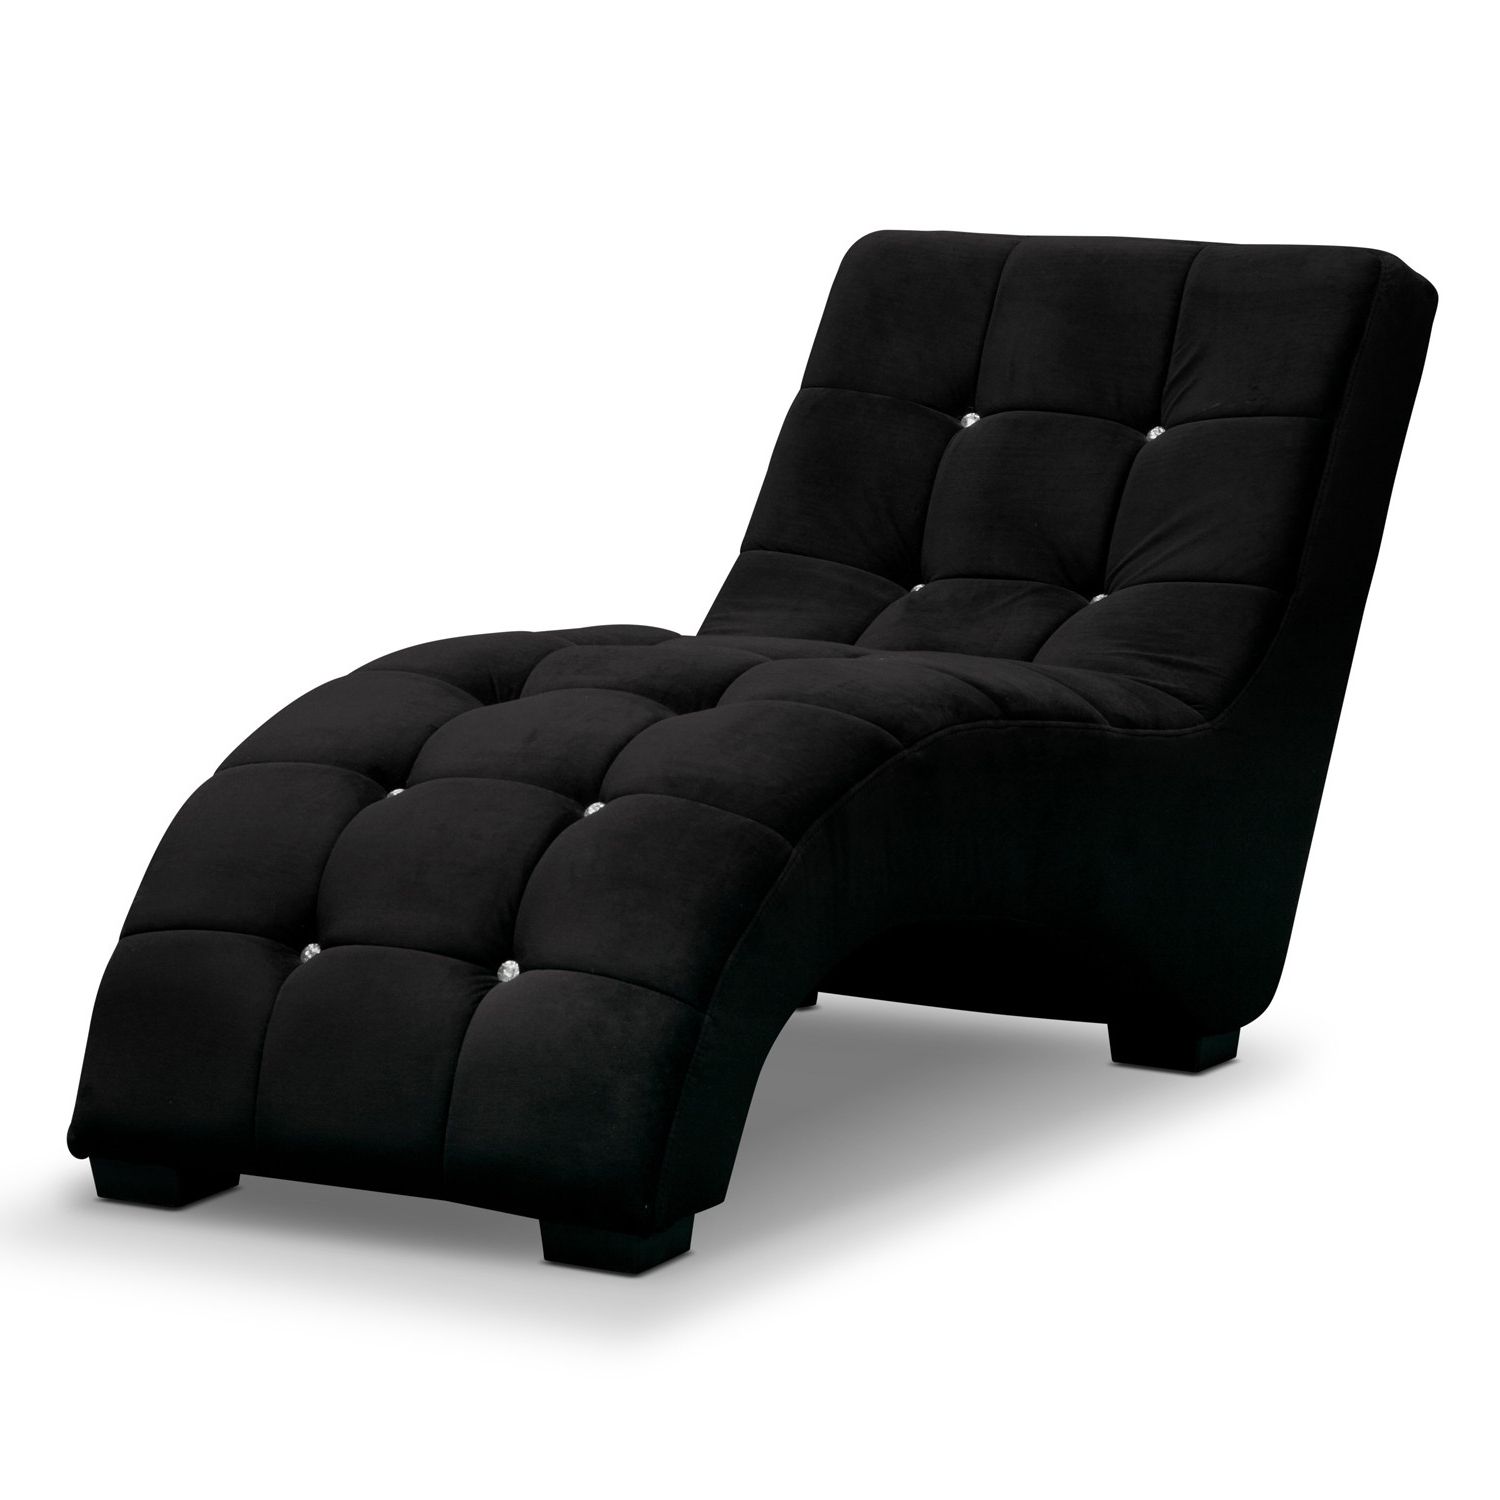 Latest L Shaped Grey Velvet Chaise Lounge Sofa And Ottoman Plus Patterned For Black Chaise Lounges (View 15 of 15)